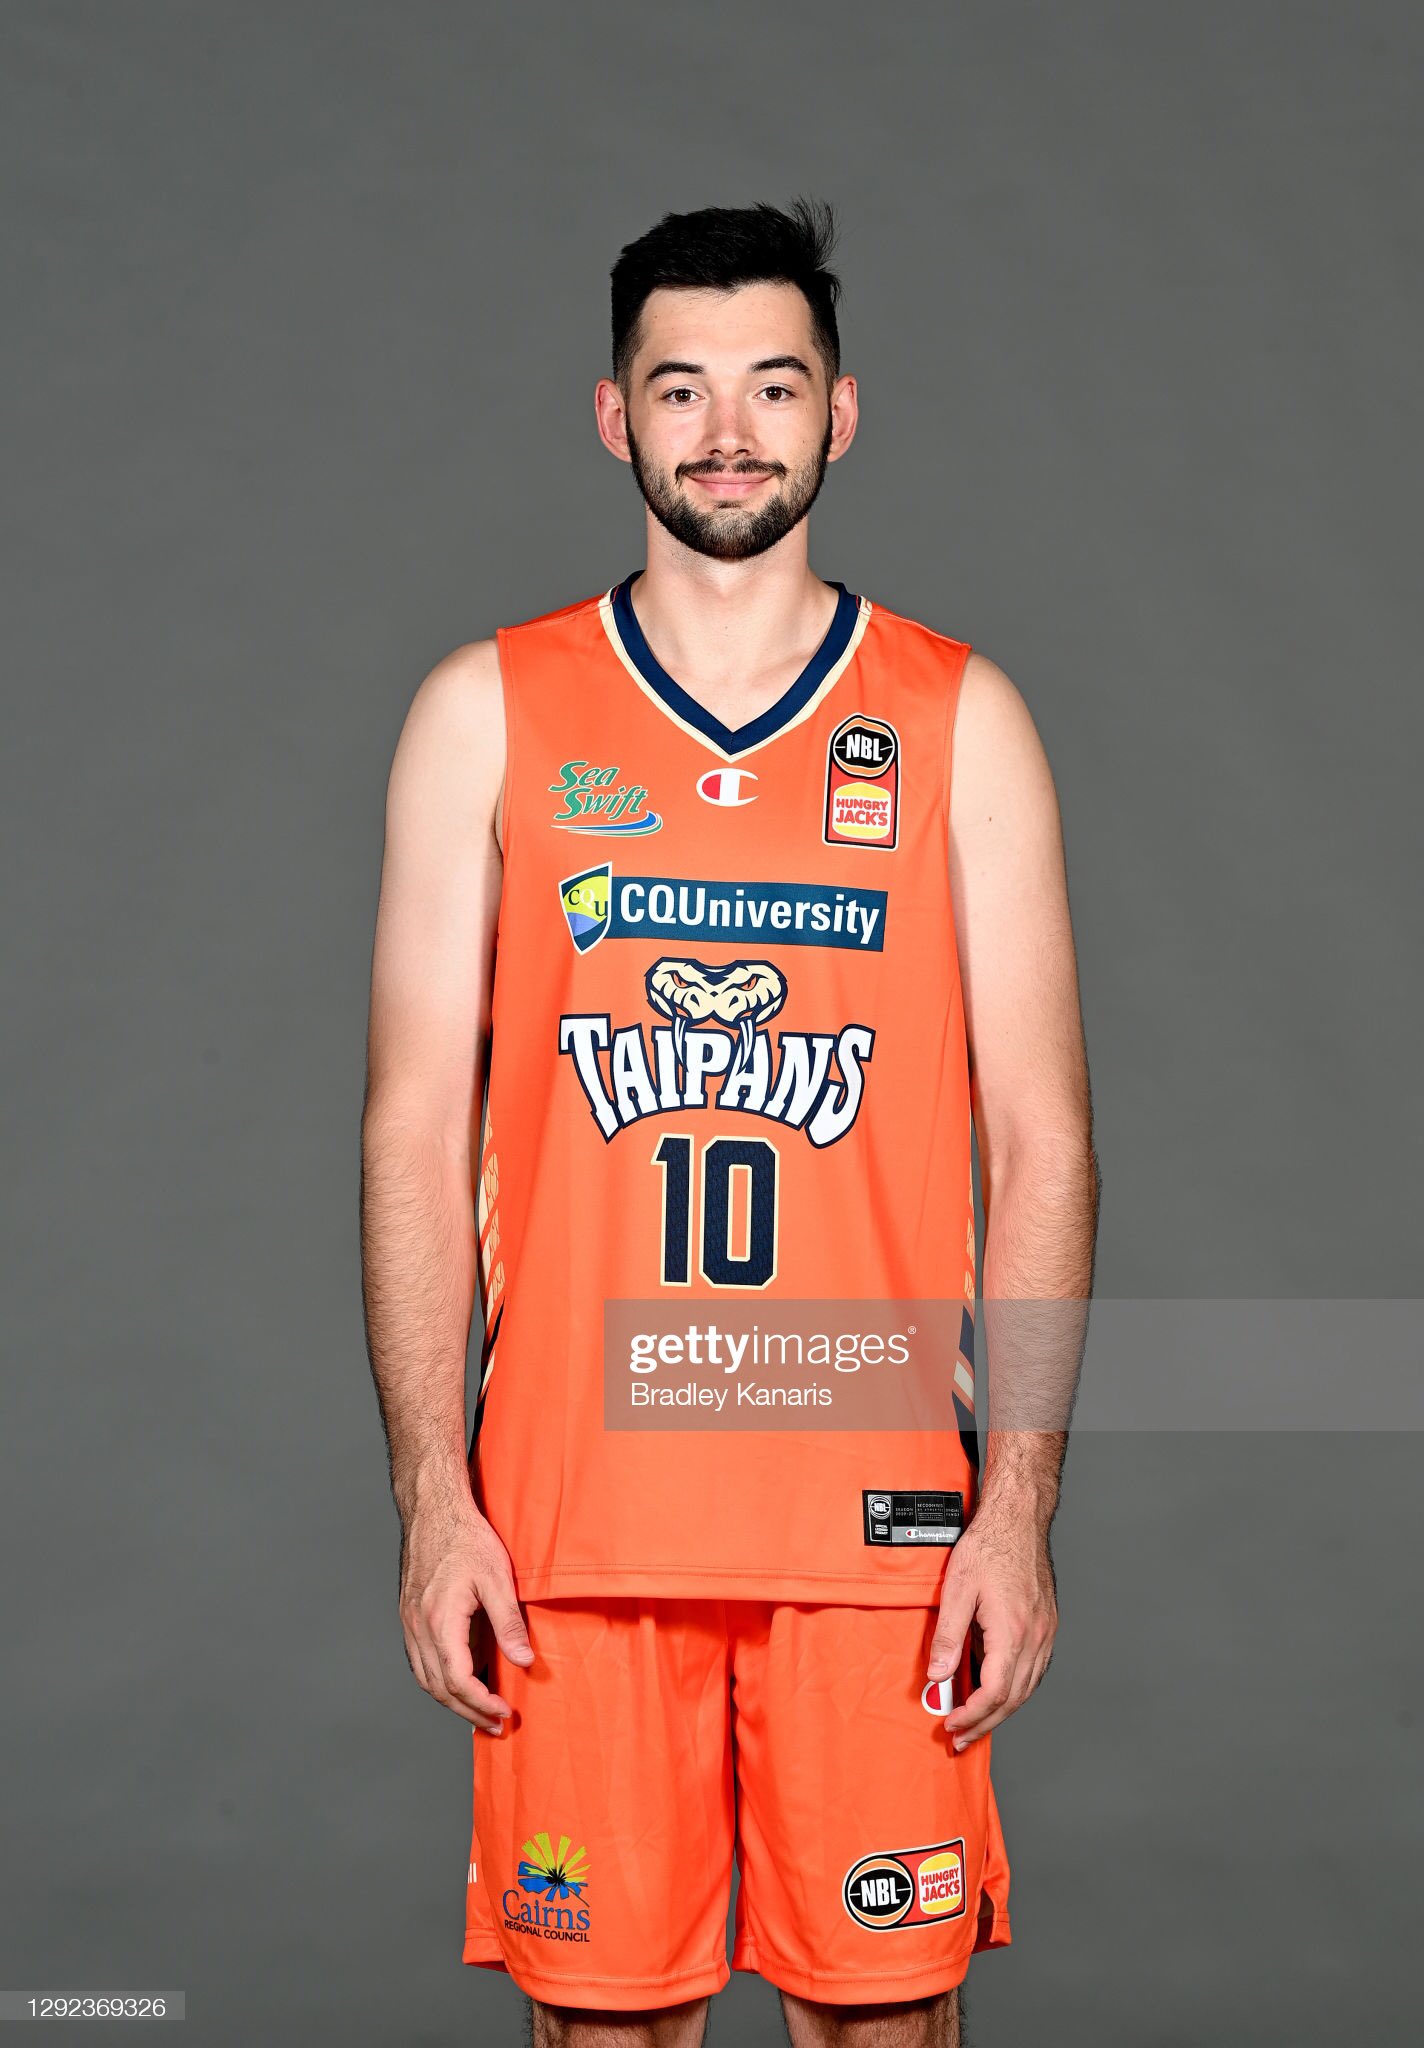 NBL News on Twitter: "Looks like the Cairns Taipans have signed 2020 NZNBL Finals MVP Jordan Hunt as a development He will the 3rd Otago Nuggets player to sign with